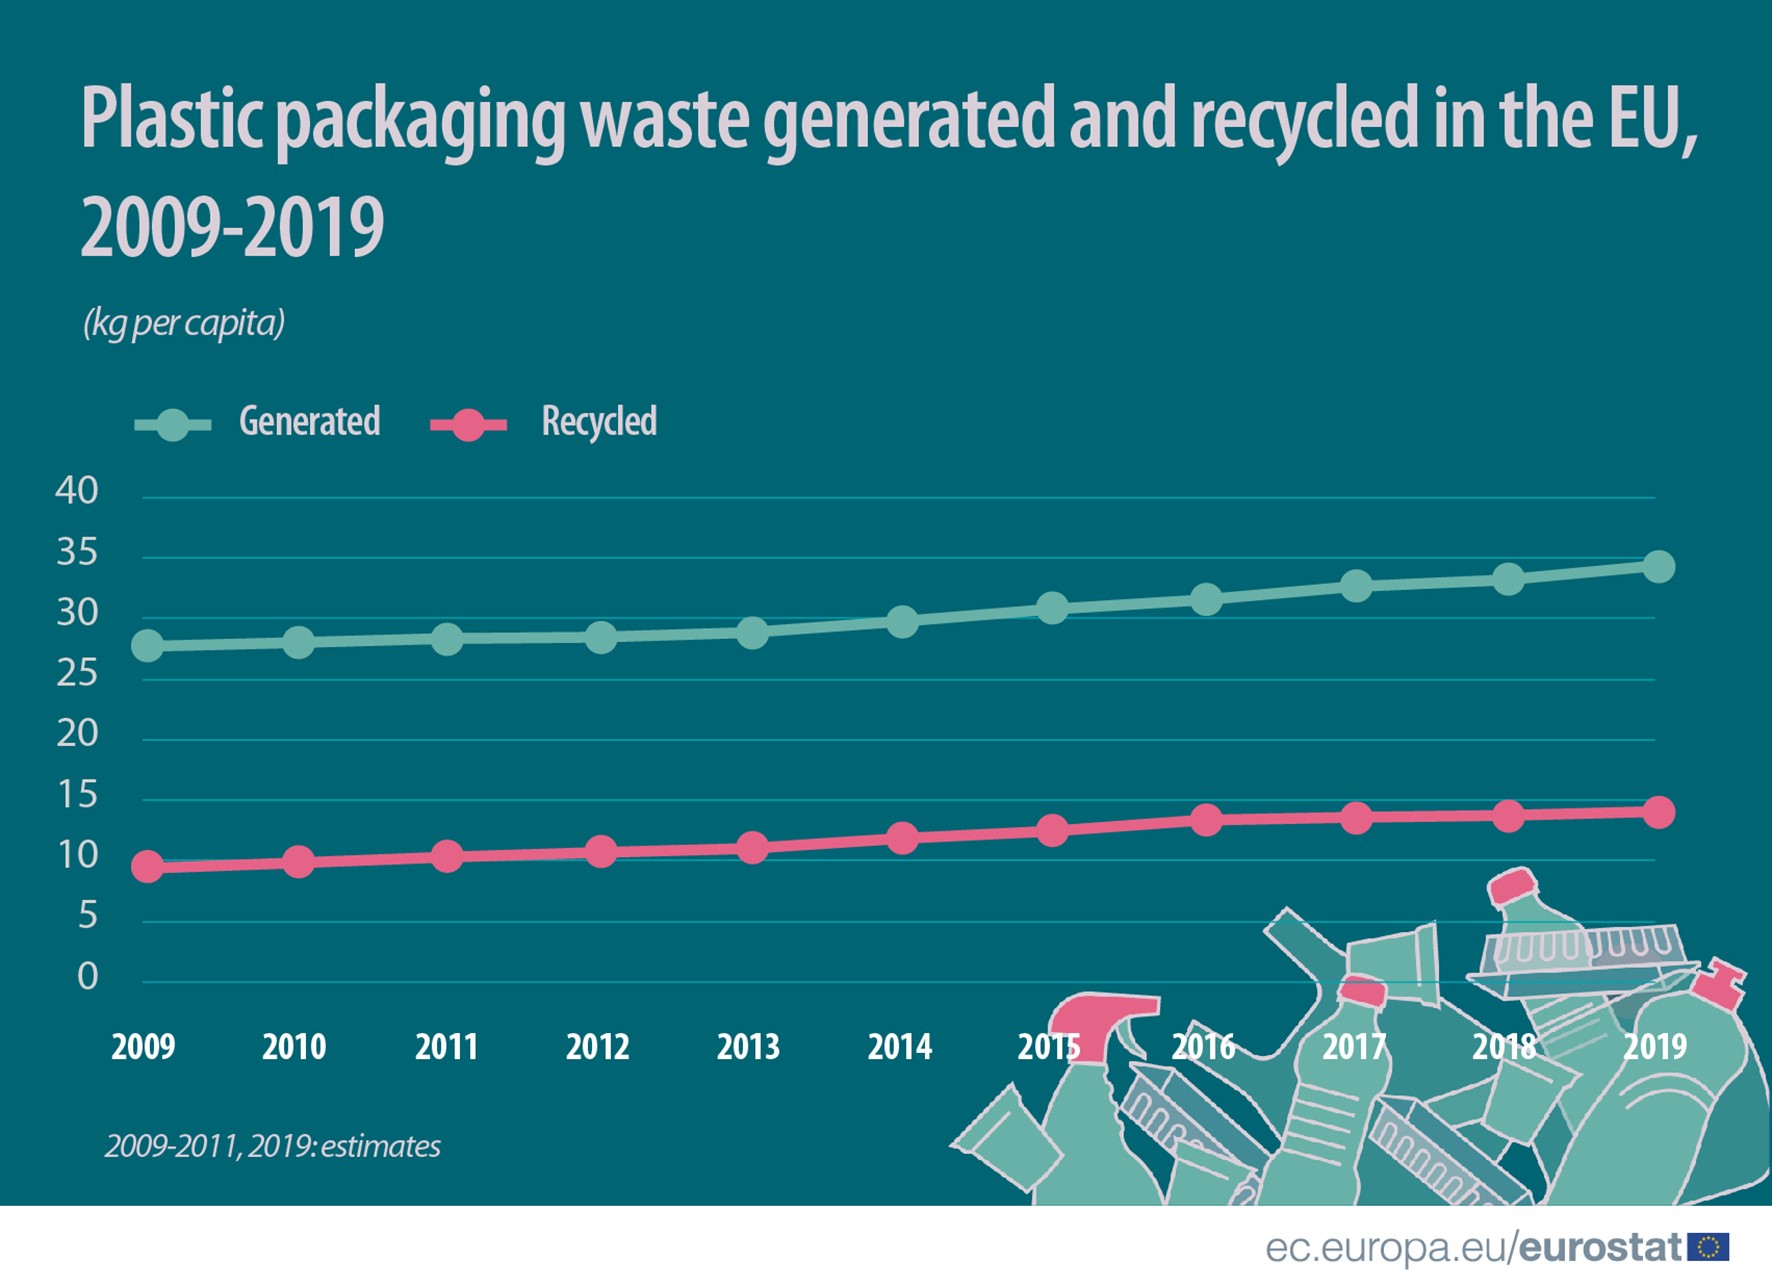 Line chart: Plastic packaging waste generated and recycled in the EU, 2009-2019, in kg